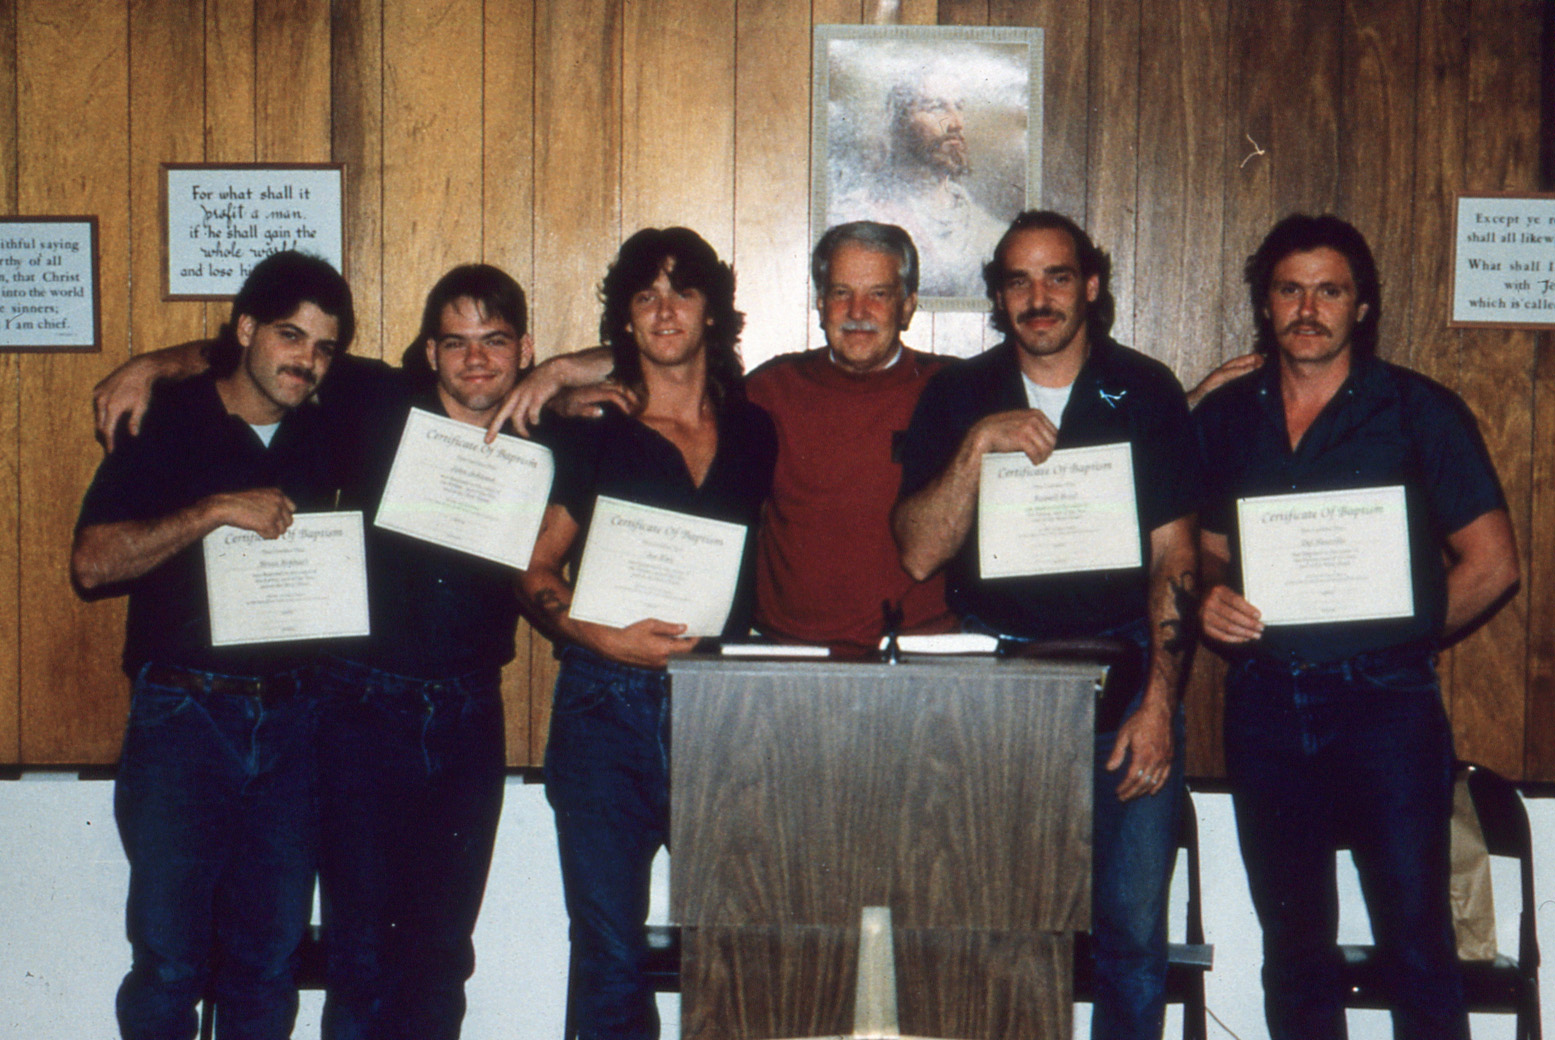 In the early days, Crossroads collaborated with the ministry now known as Reach the Forgotten to minister to Kent County Honor Camp participants at the Kent County Jail. Students pose with volunteer Andy VanderWall.